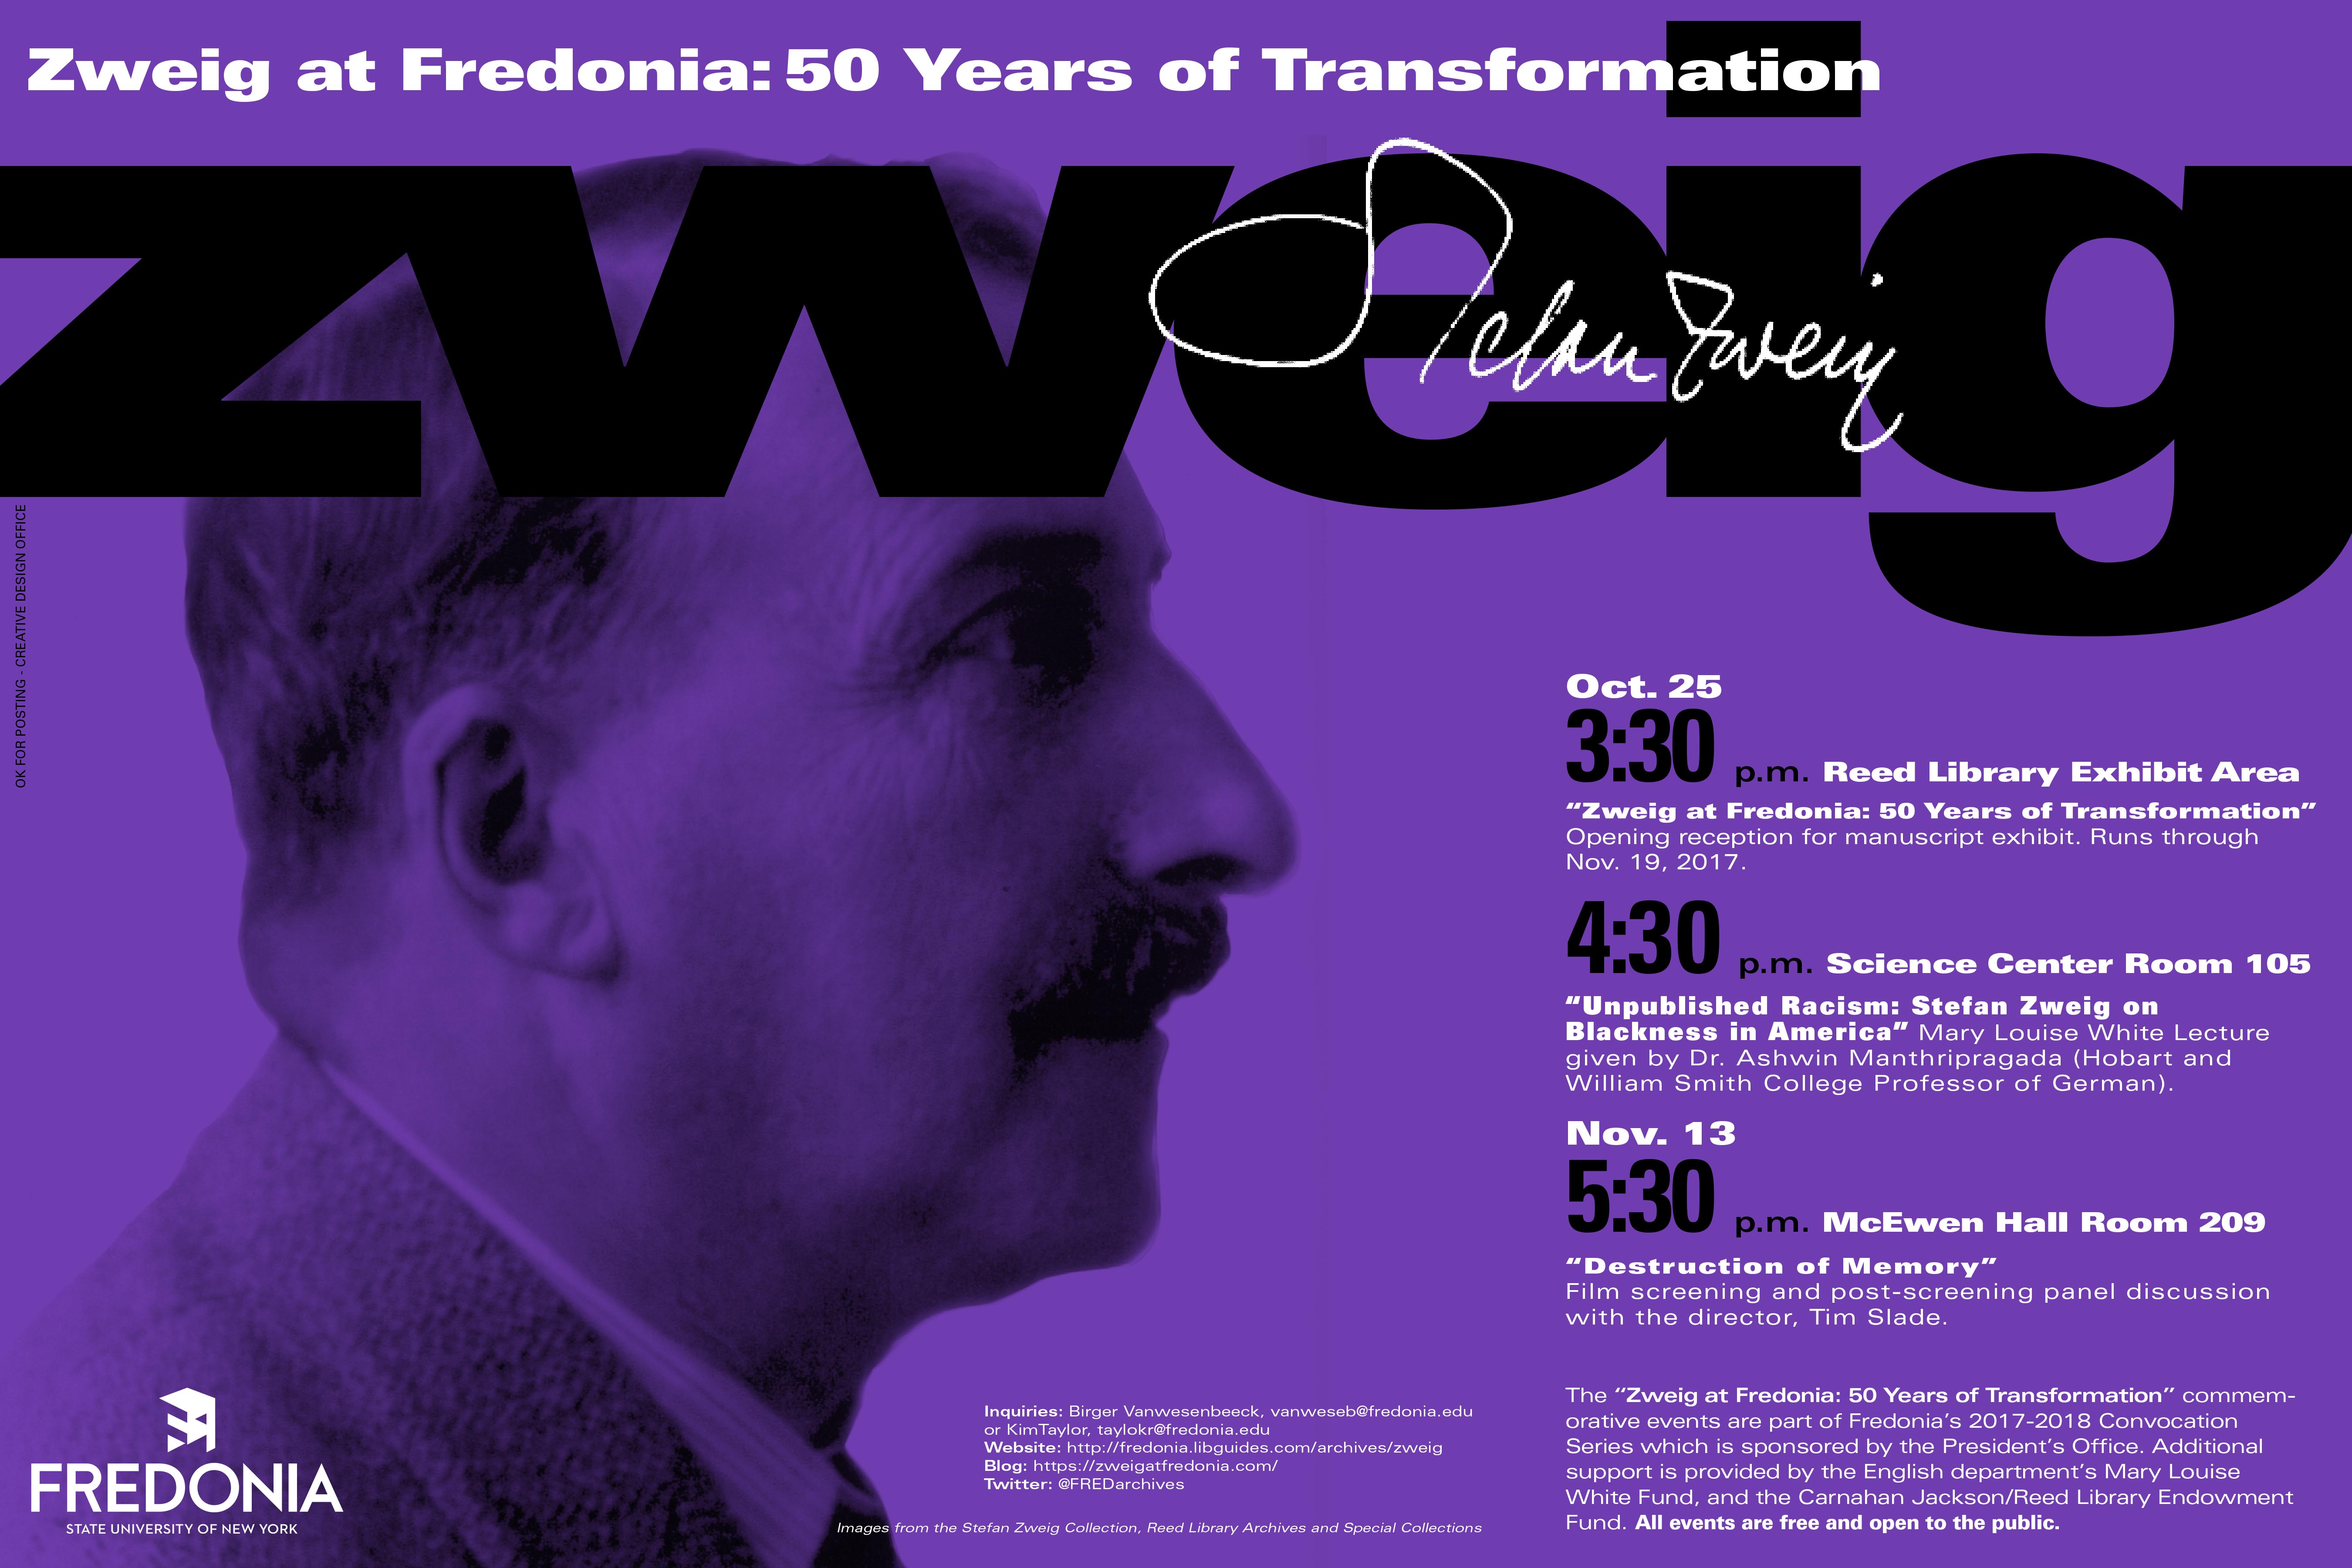 Zweig at 50 Poster, including notice of MLW Lecture by Ashwin Manthripragada, Oct. 25, 2017, 4:30-5:30 p.m., Science Center 105, Kelley Family Auditorium.